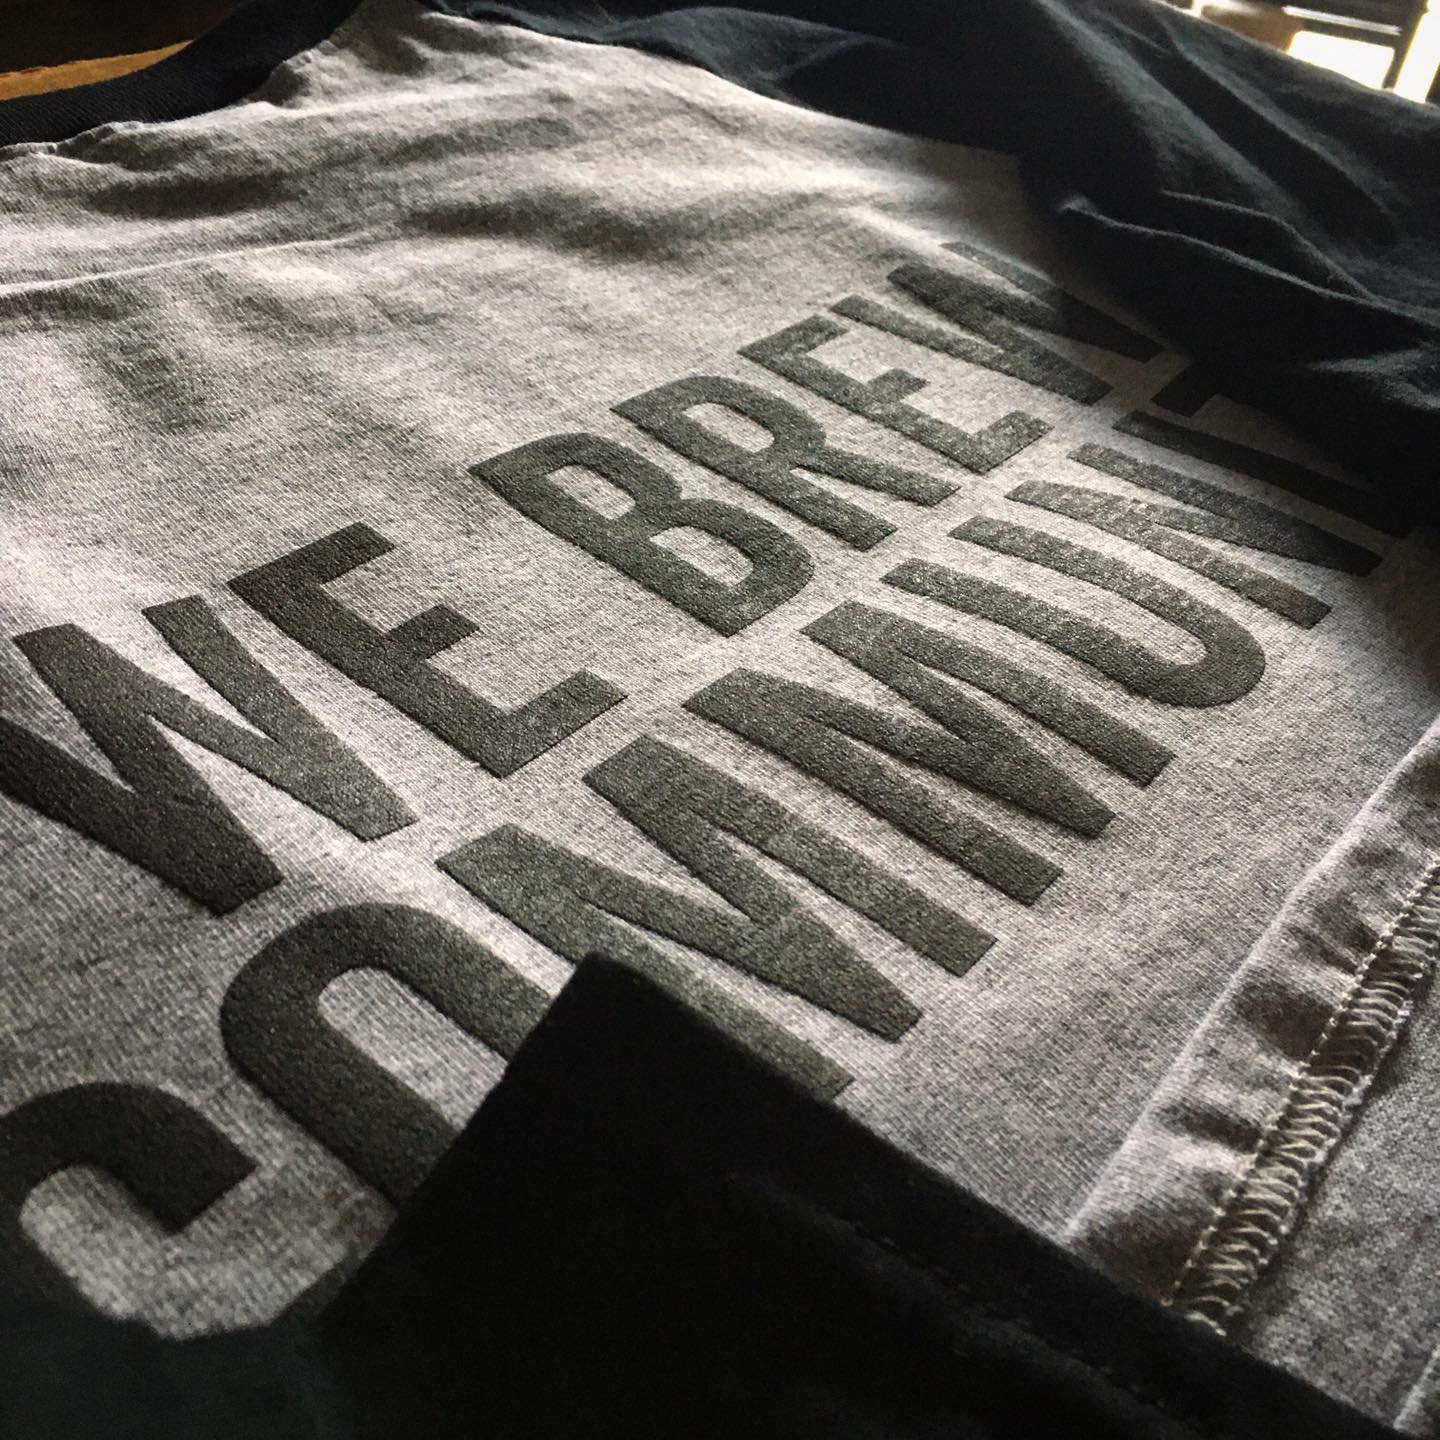 We Brew Community t-shirts for 3 Roads Brewing